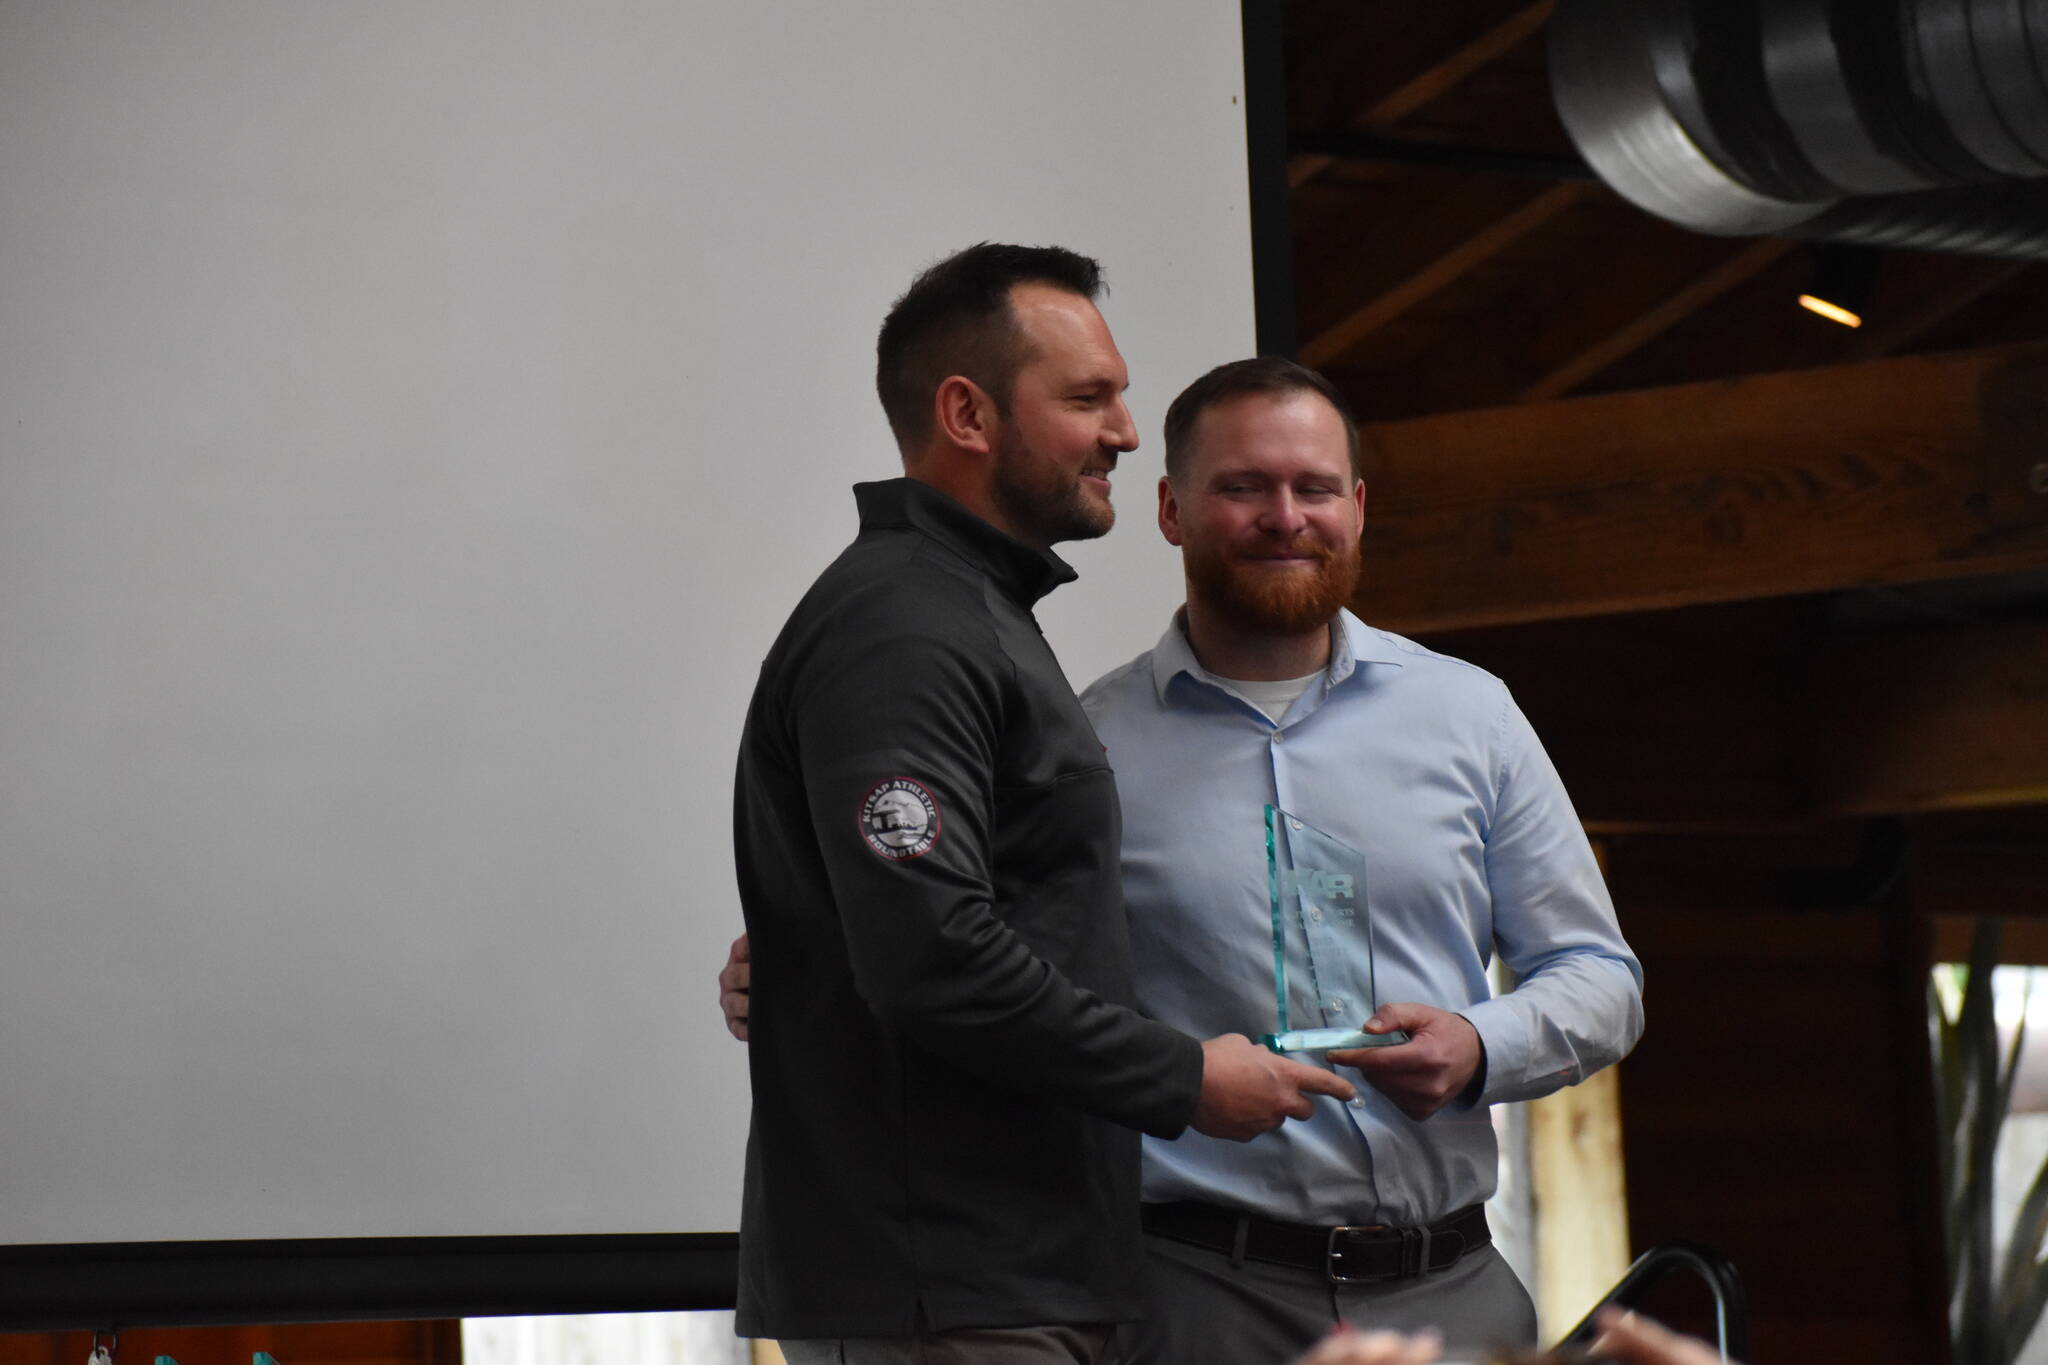 Drew Vettleson was inducted into the Kitsap Sports Hall of Fame.